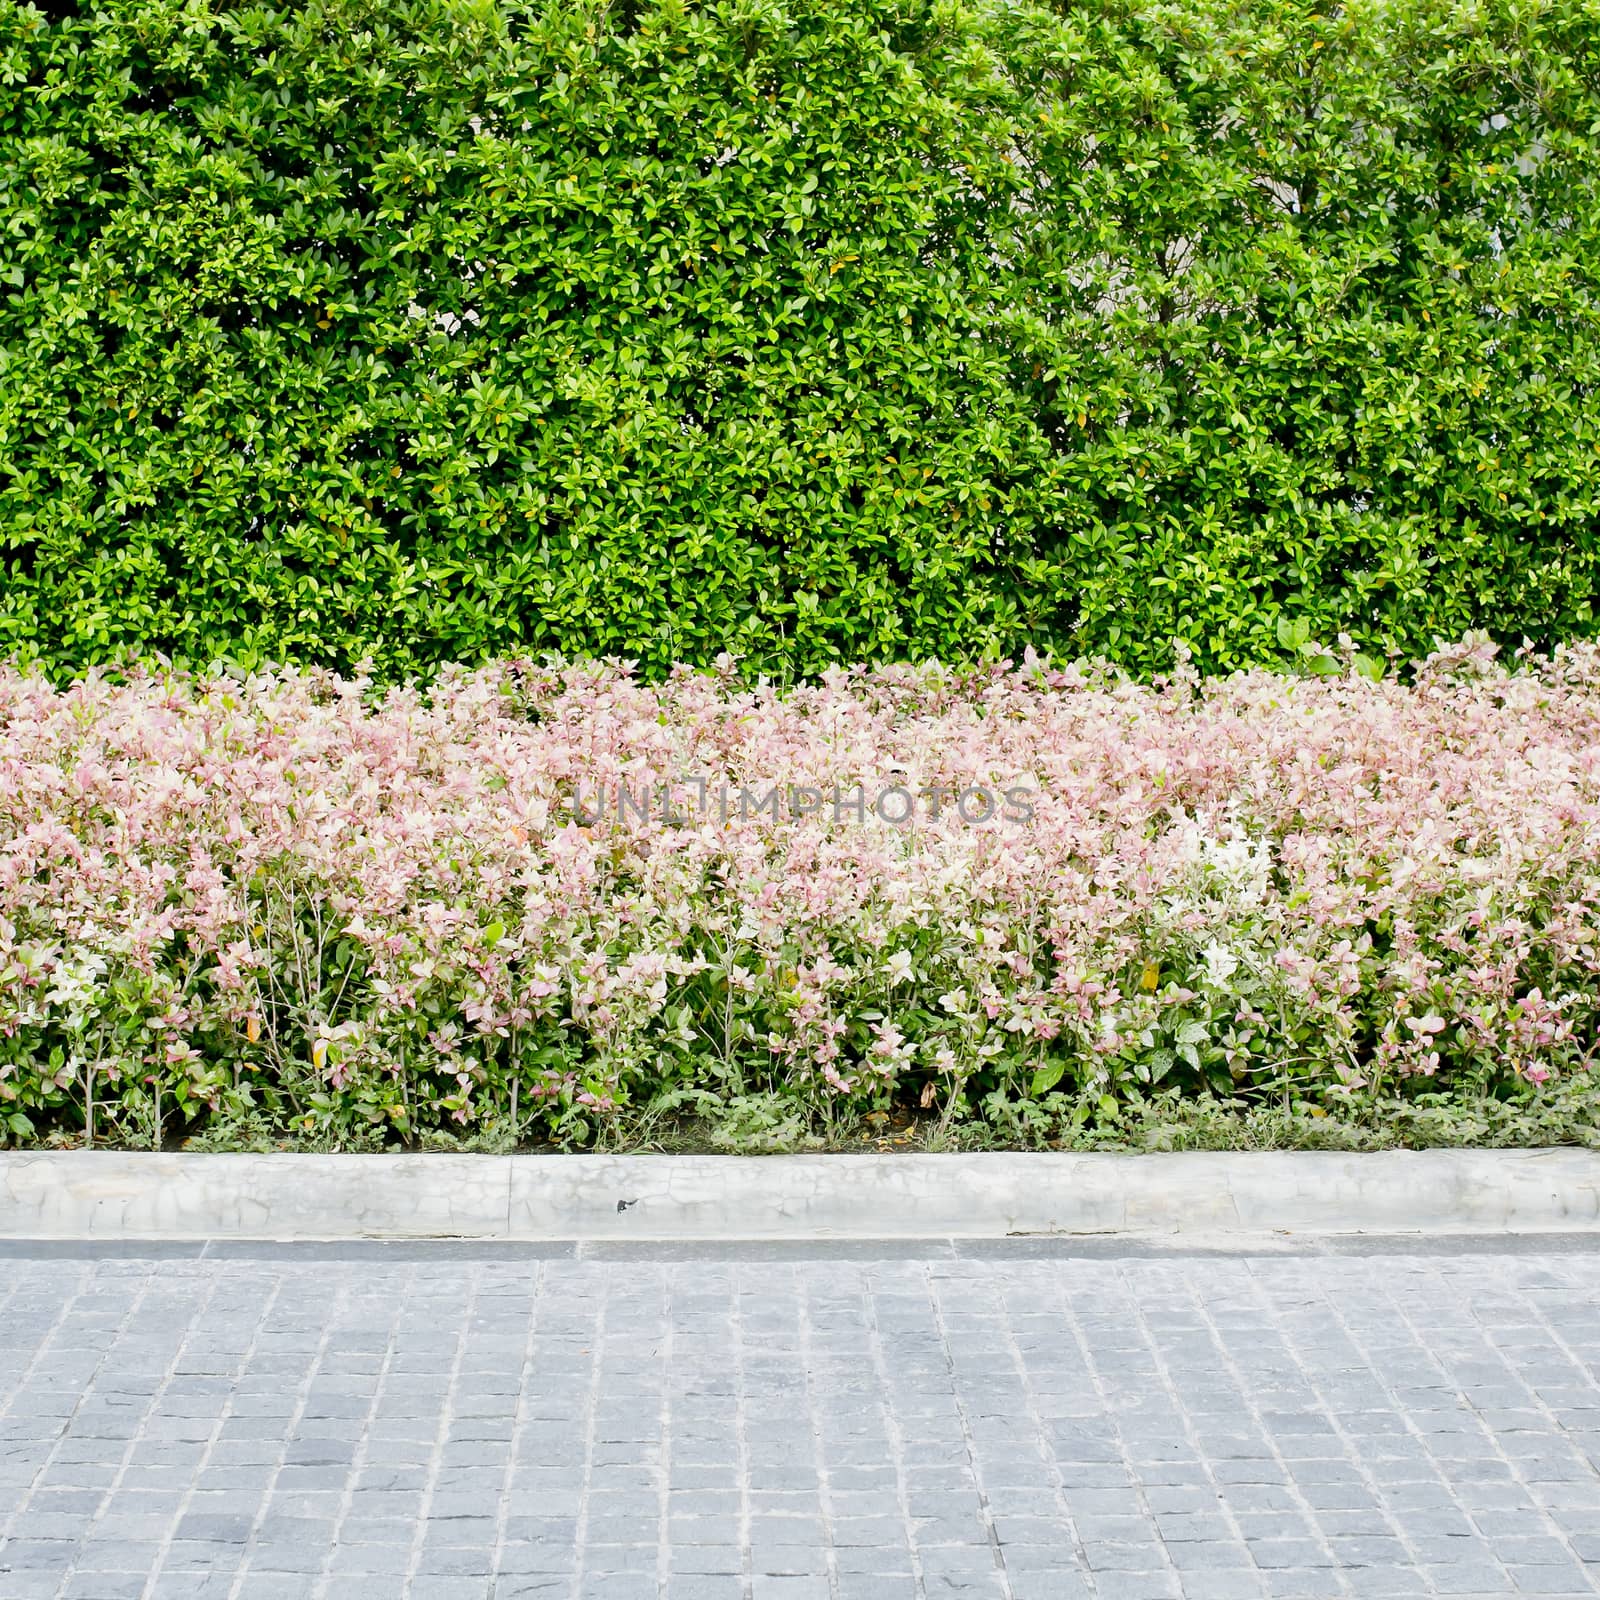 walkwayand pink flowers with green plants background